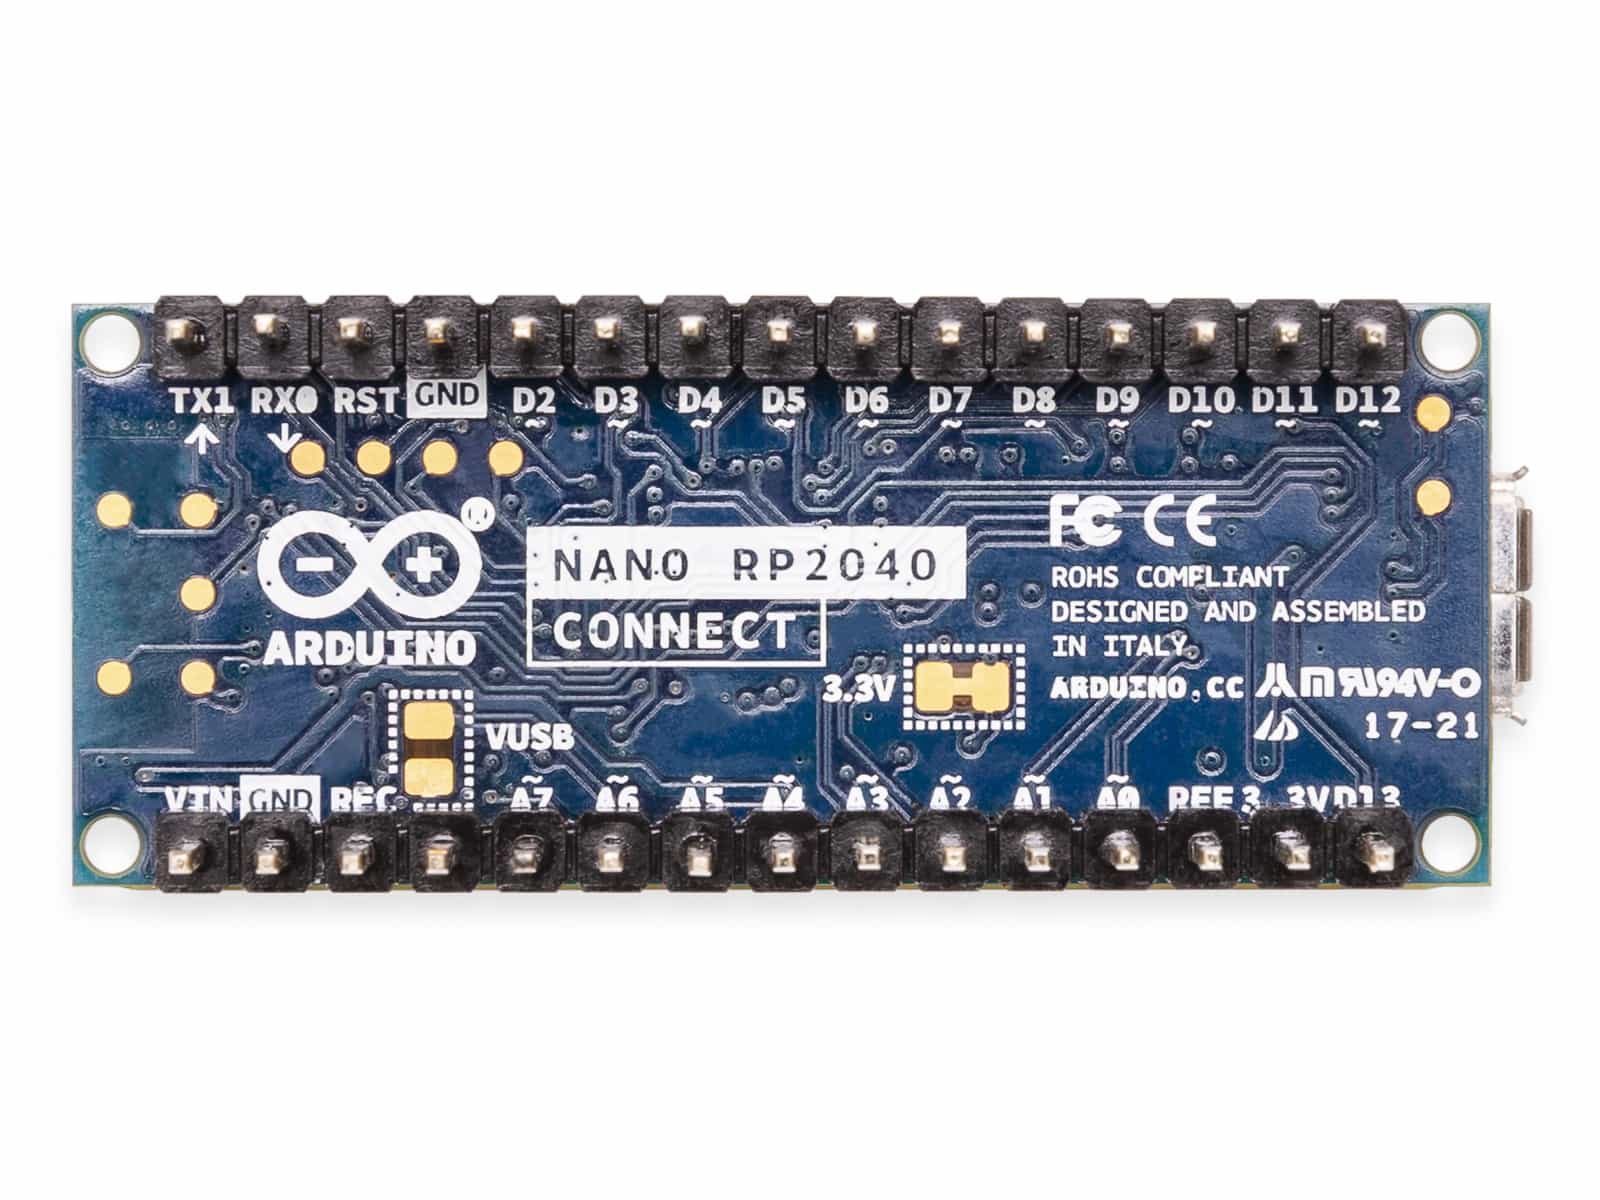 ARDUINO ® Board NANO RP2040 CONNECT without headers